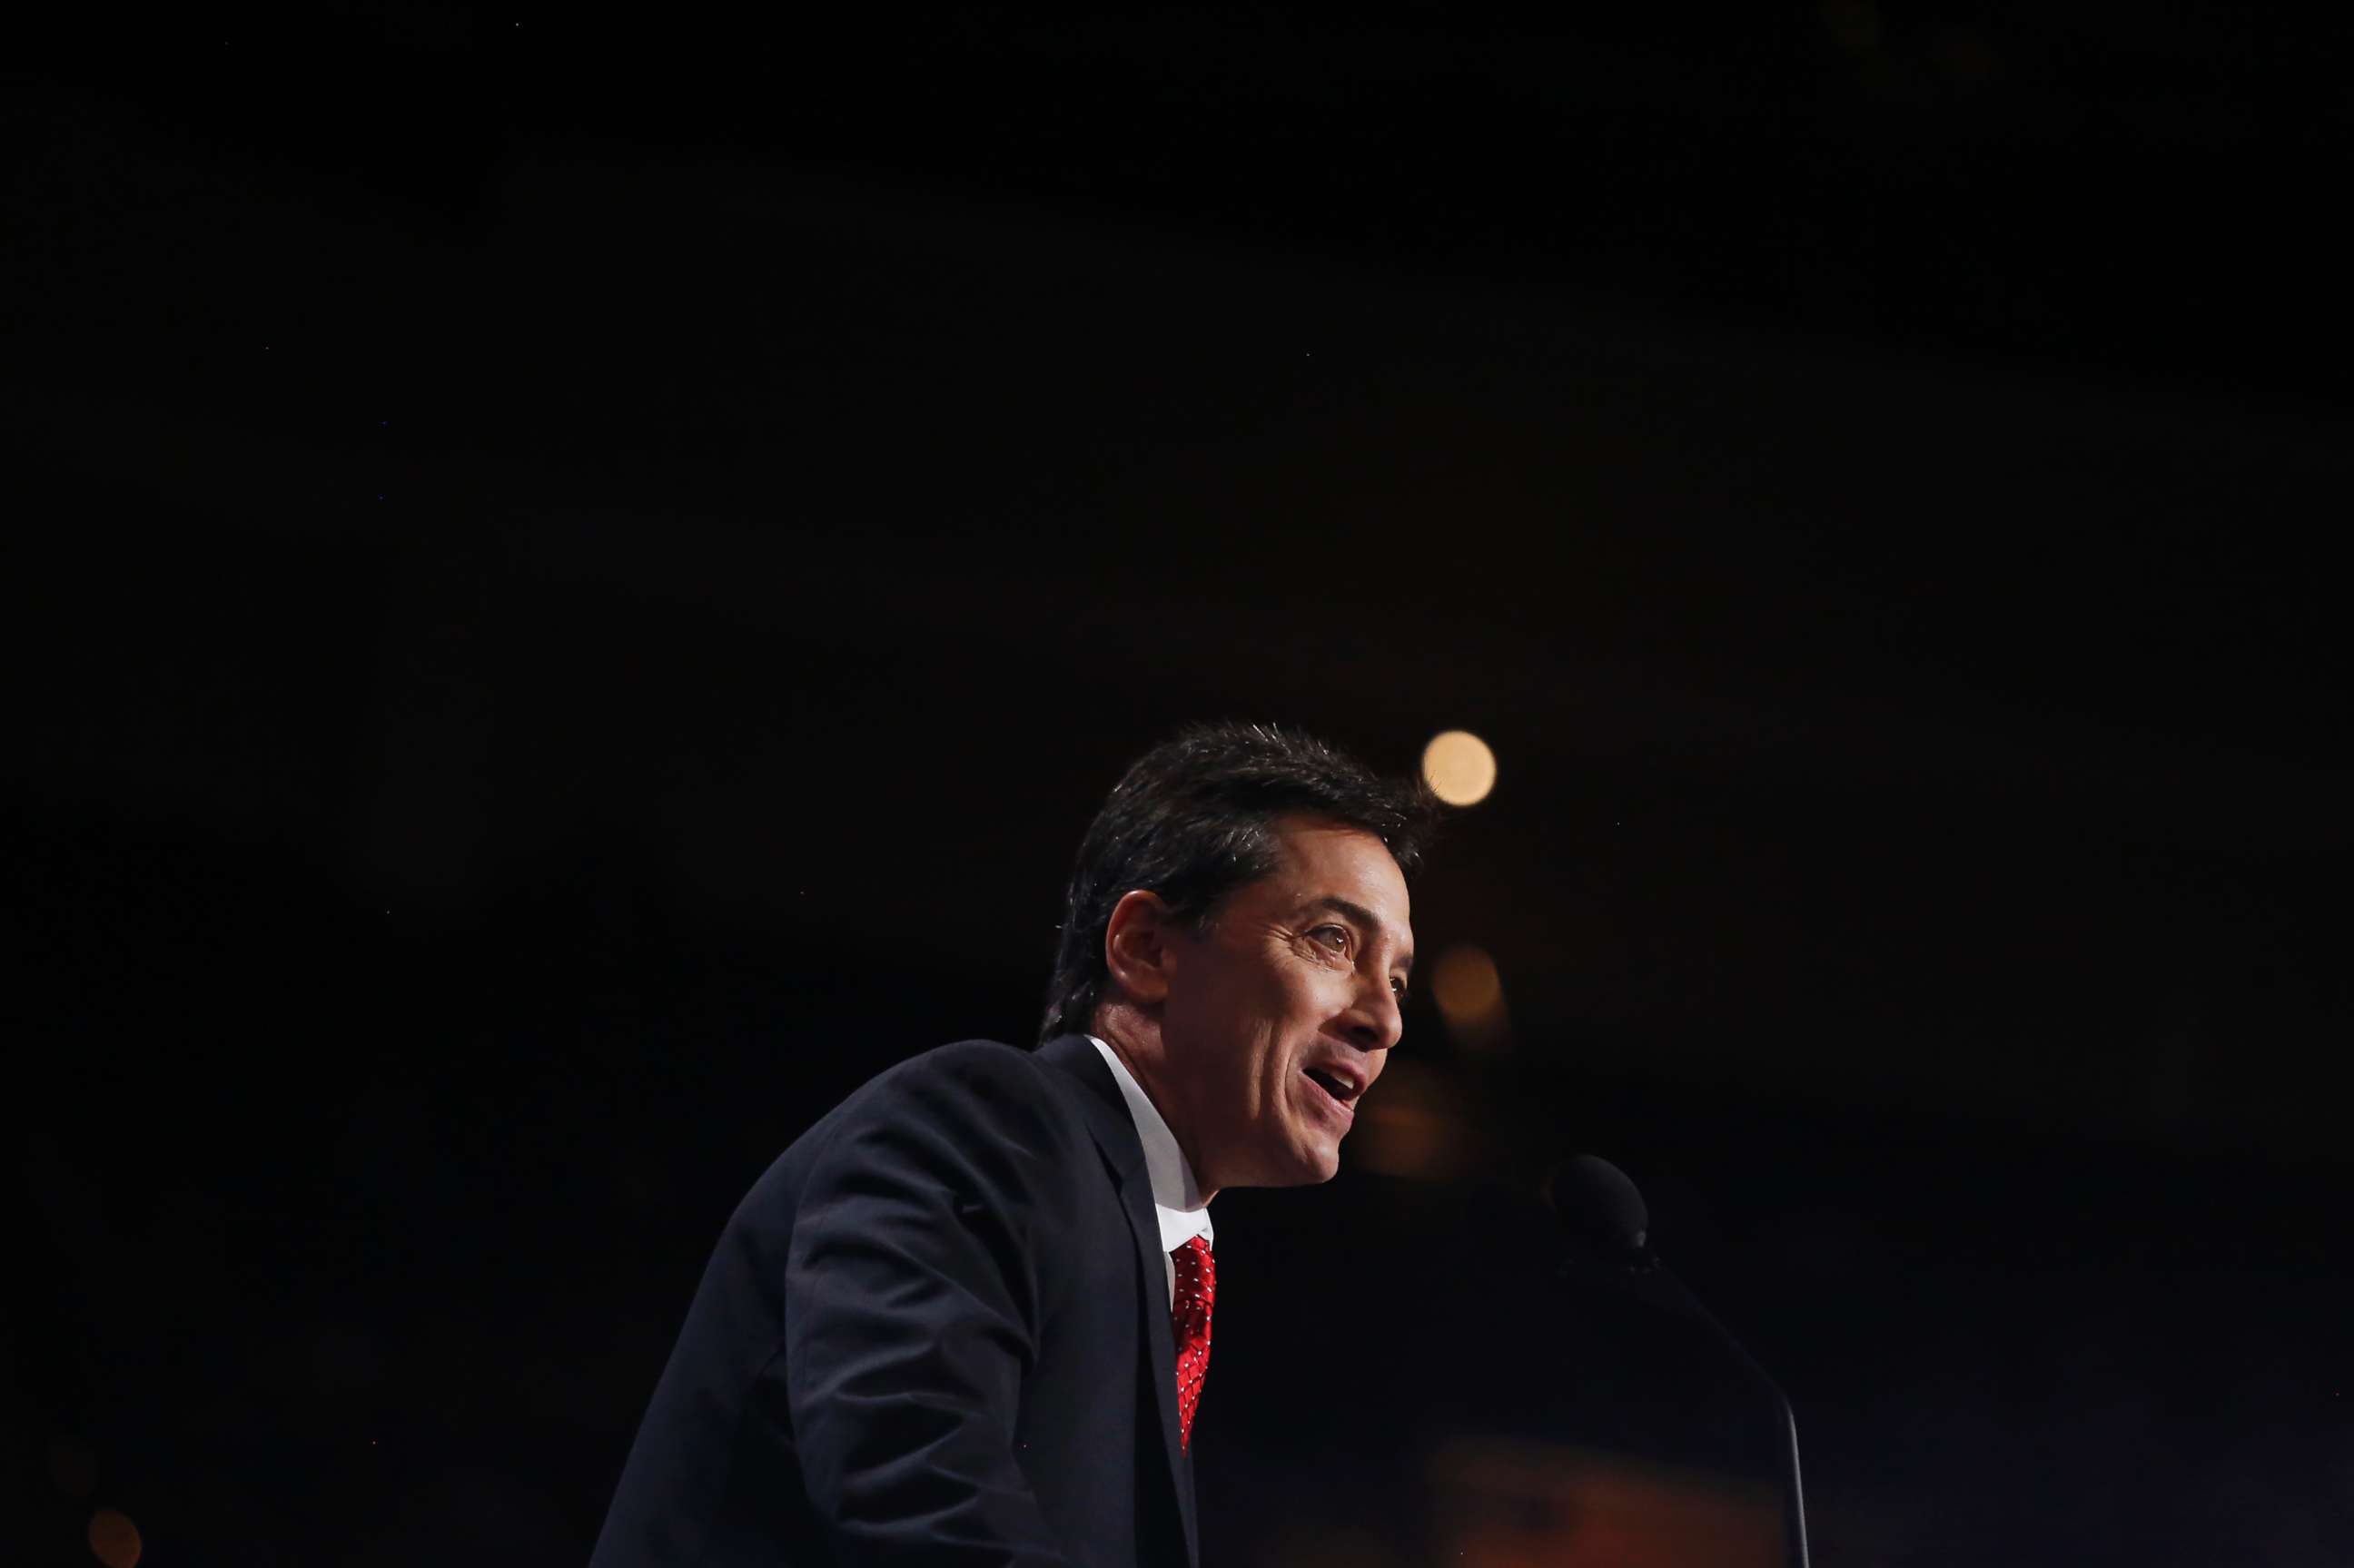 PHOTO: Scott Baio speaks during the Republican National Convention (RNC) in Cleveland, Ohio, July 18, 2016.